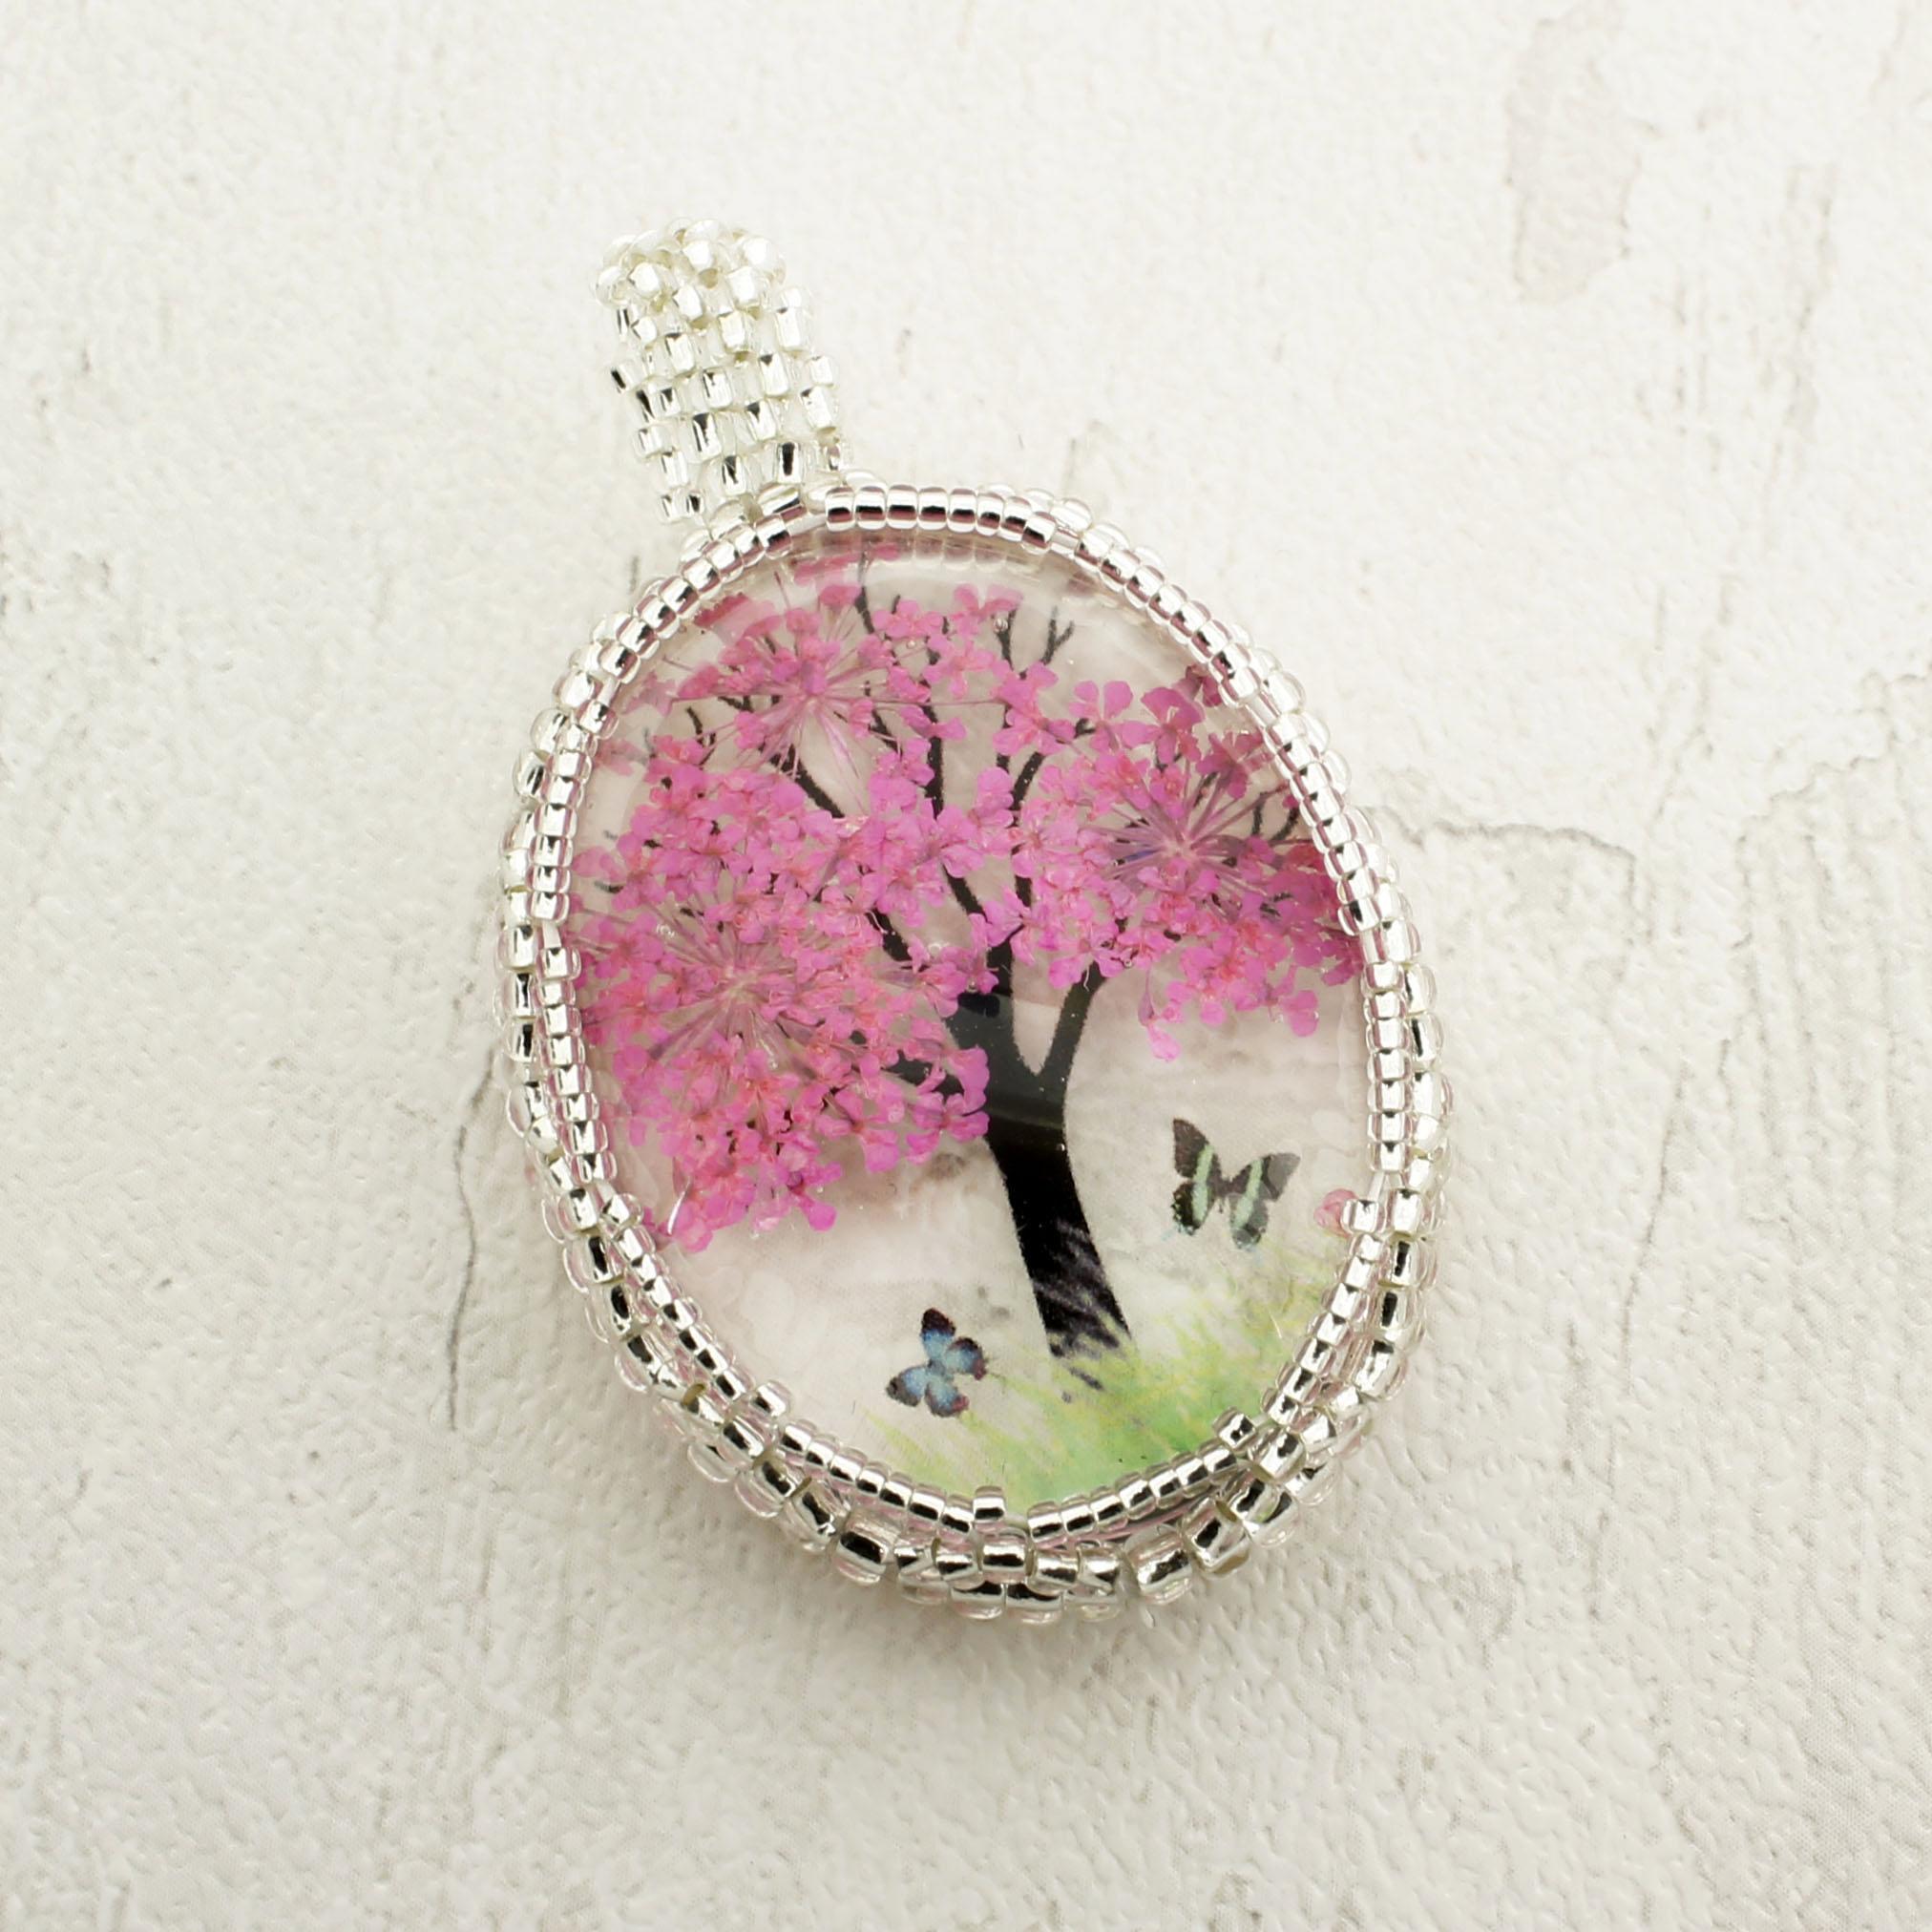 Everbloom Double Cabochon Pendant Kit - Cherry Blossom